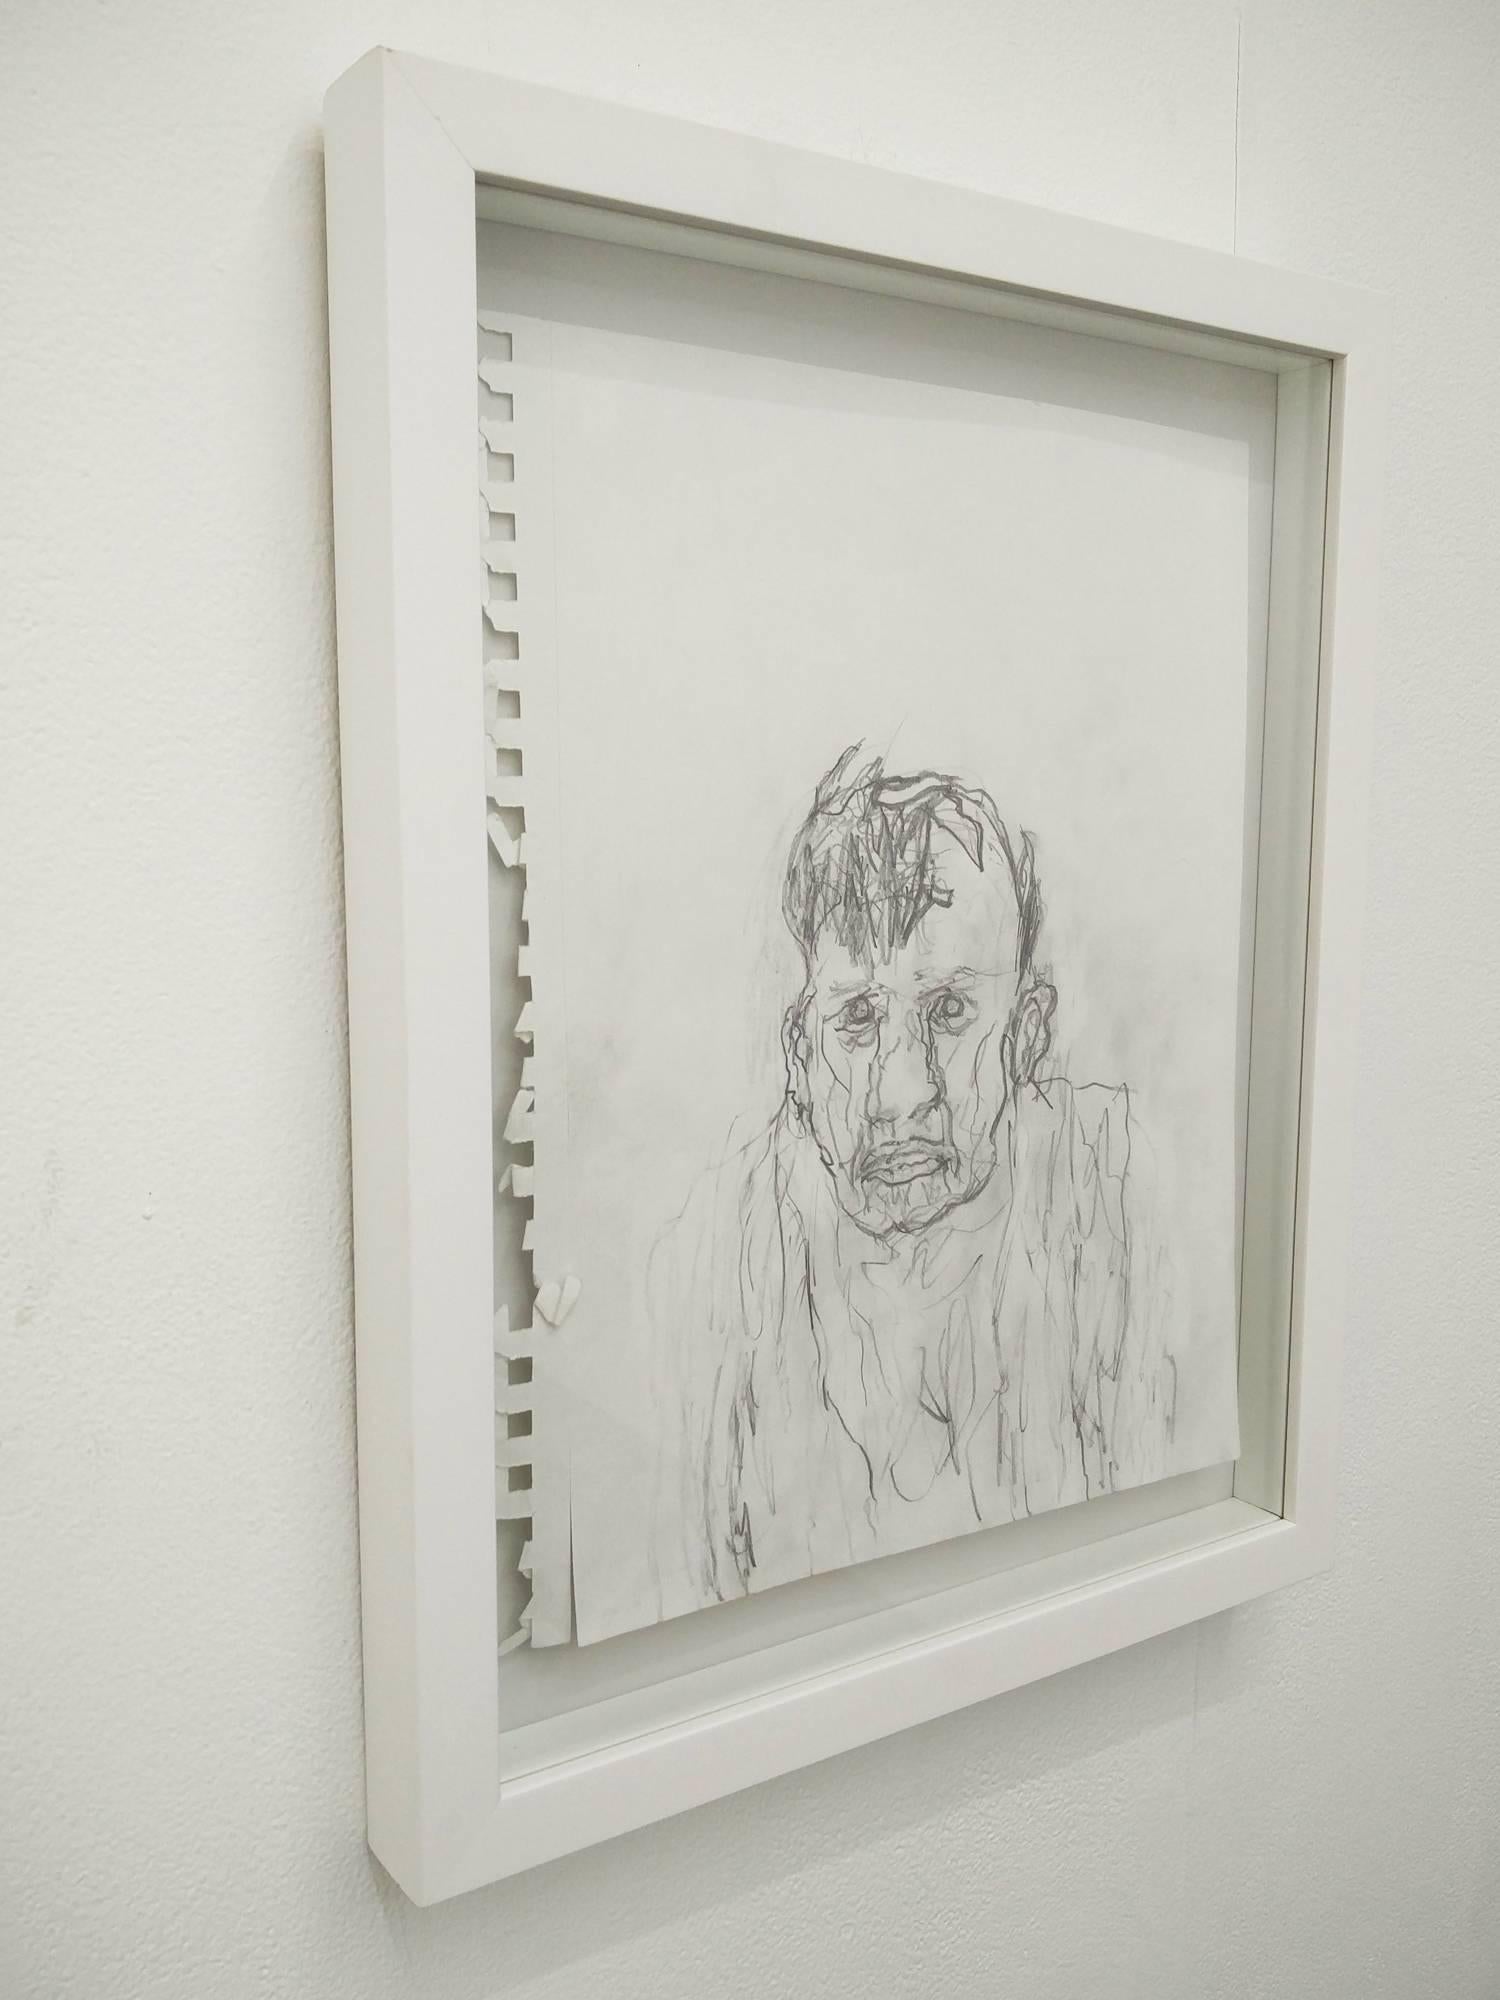 This drawing is from a series of semi-automatic, diary-like drawings (2014 2015), which Vega produced nightly. The drawings, depictions of a single mythical man, also form, together, a shifting, serial self-portrait.

Vega once said: “They all look